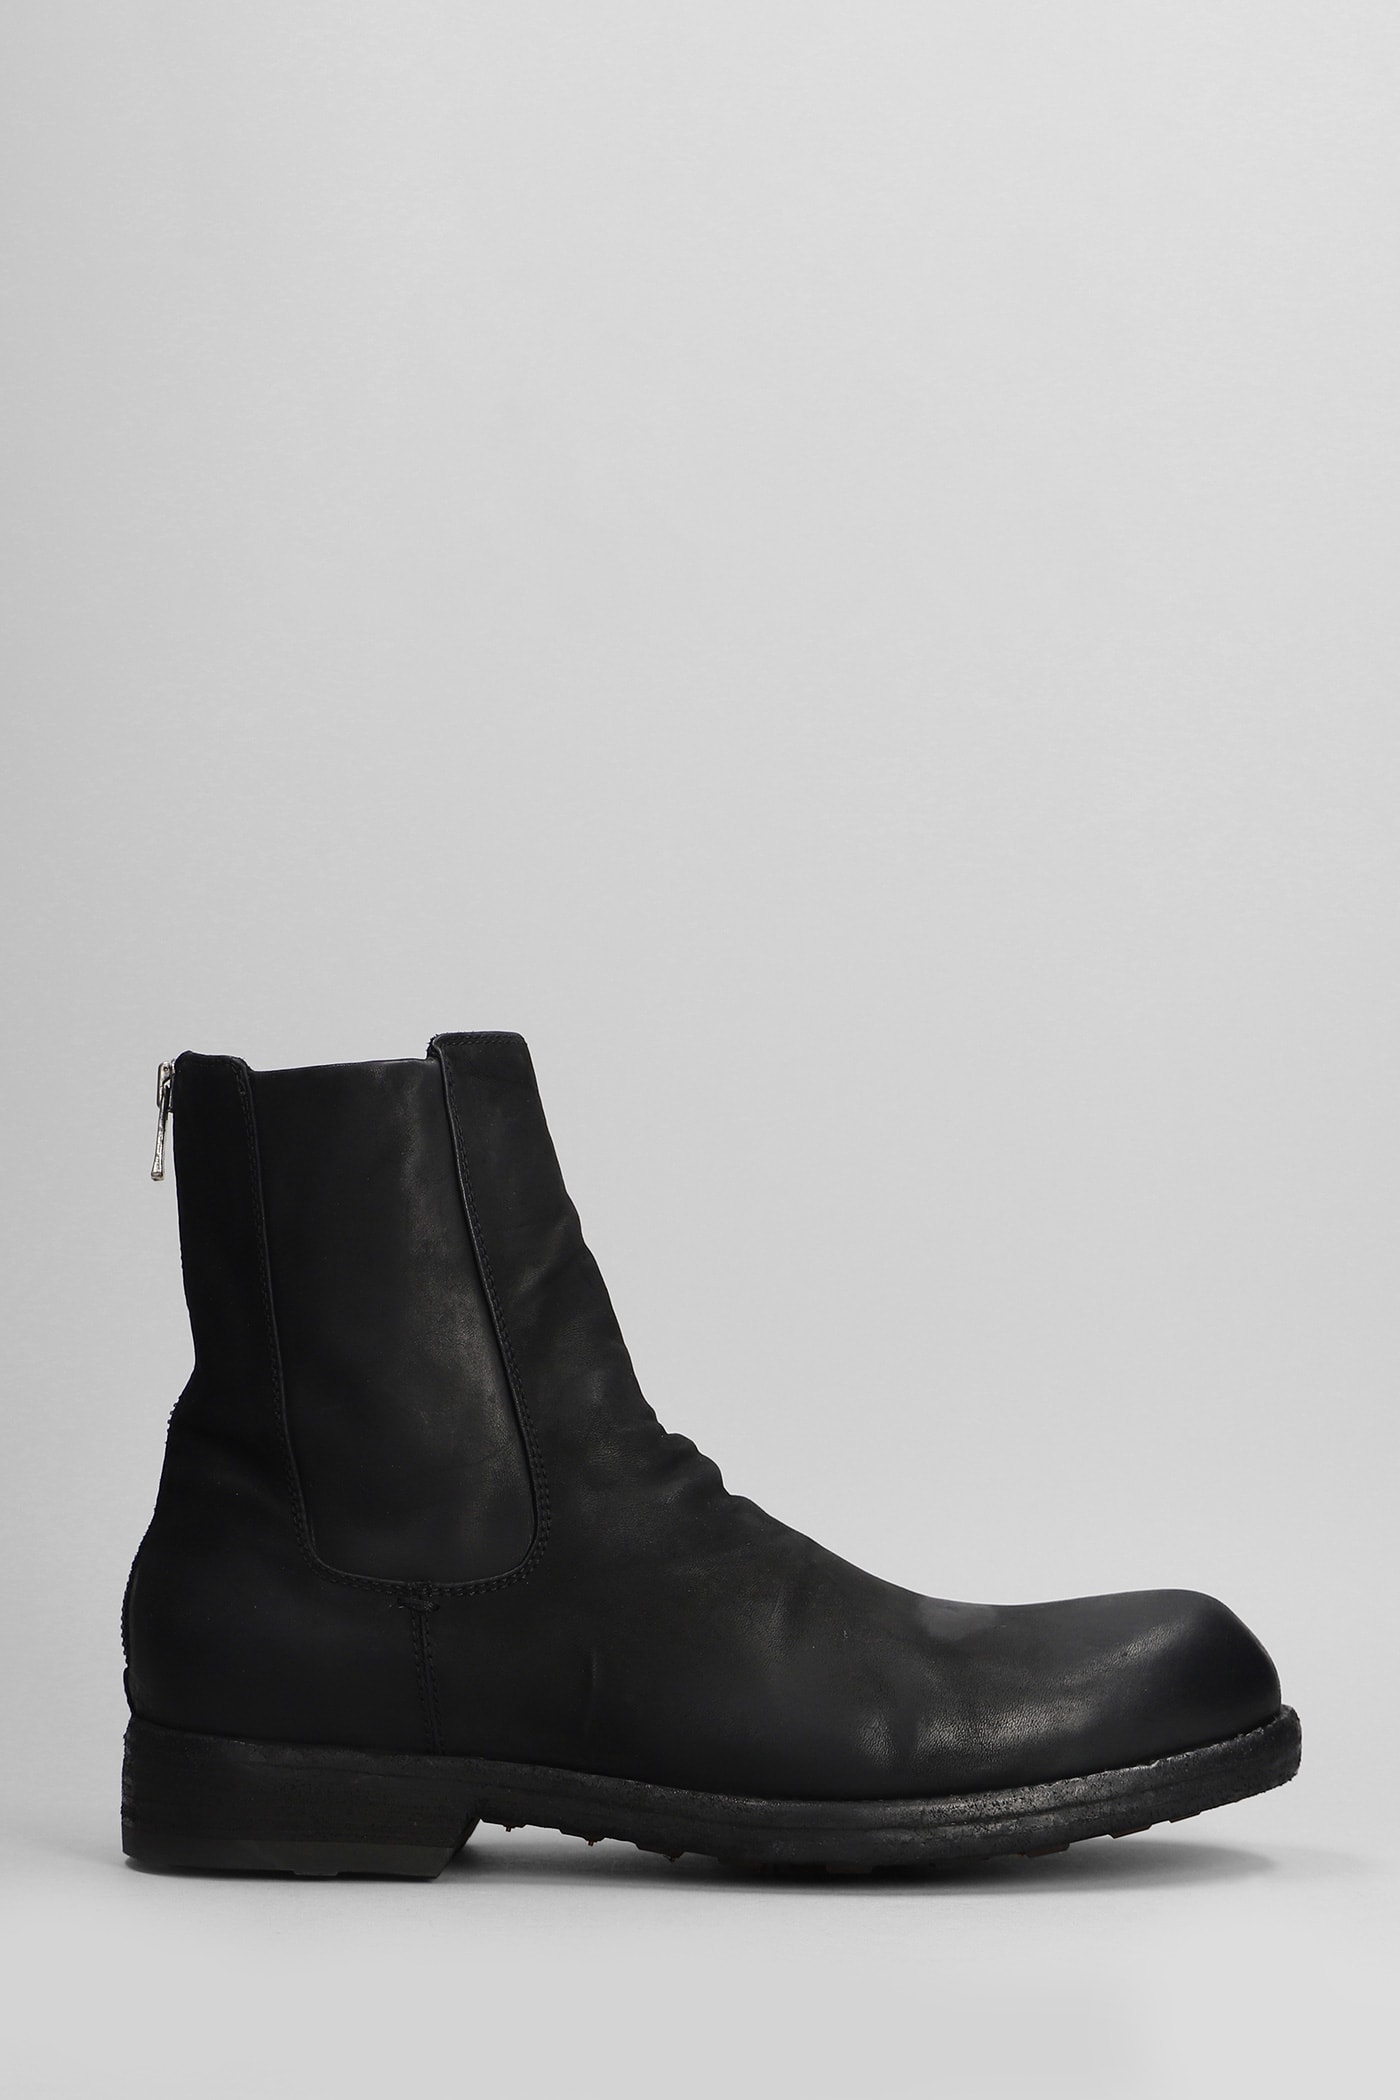 Bulla Dd Ankle Boots In Black Leather